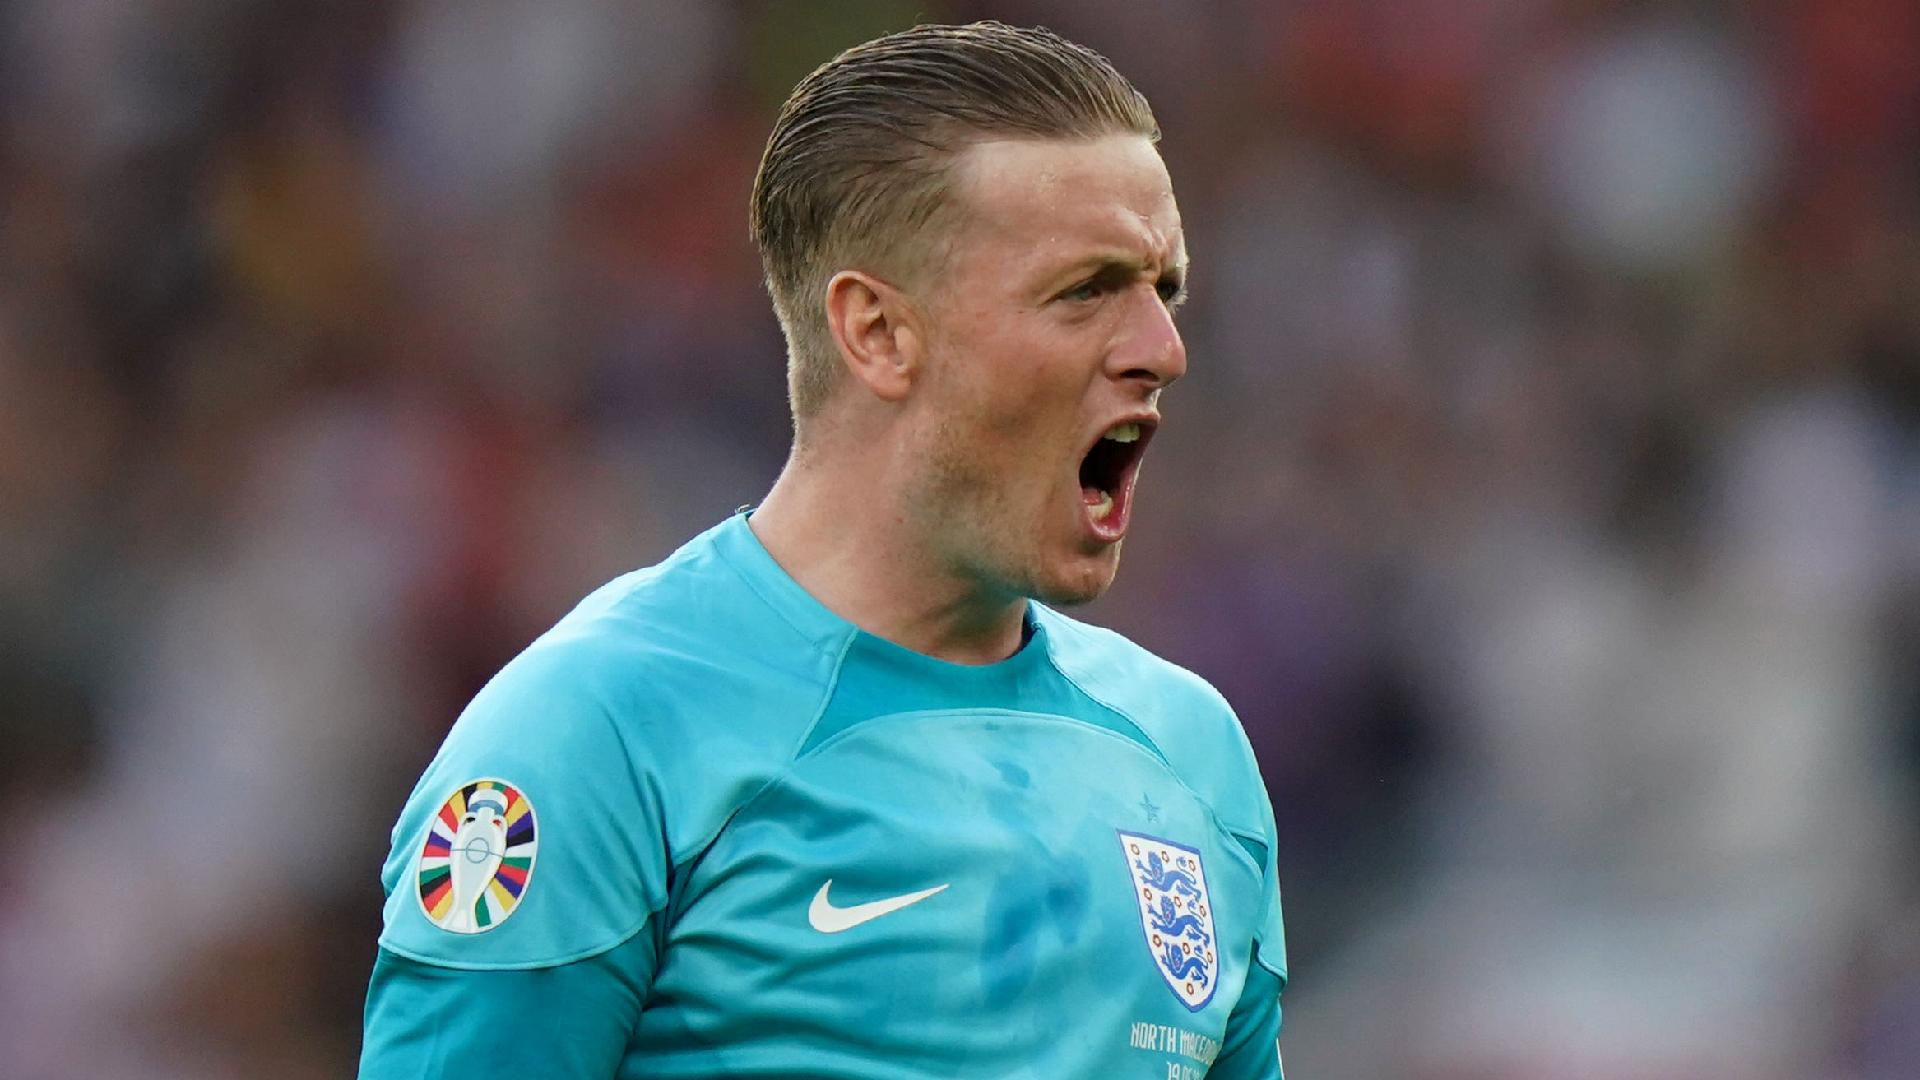 Jordan Pickford insists England are not looking for revenge against Italy